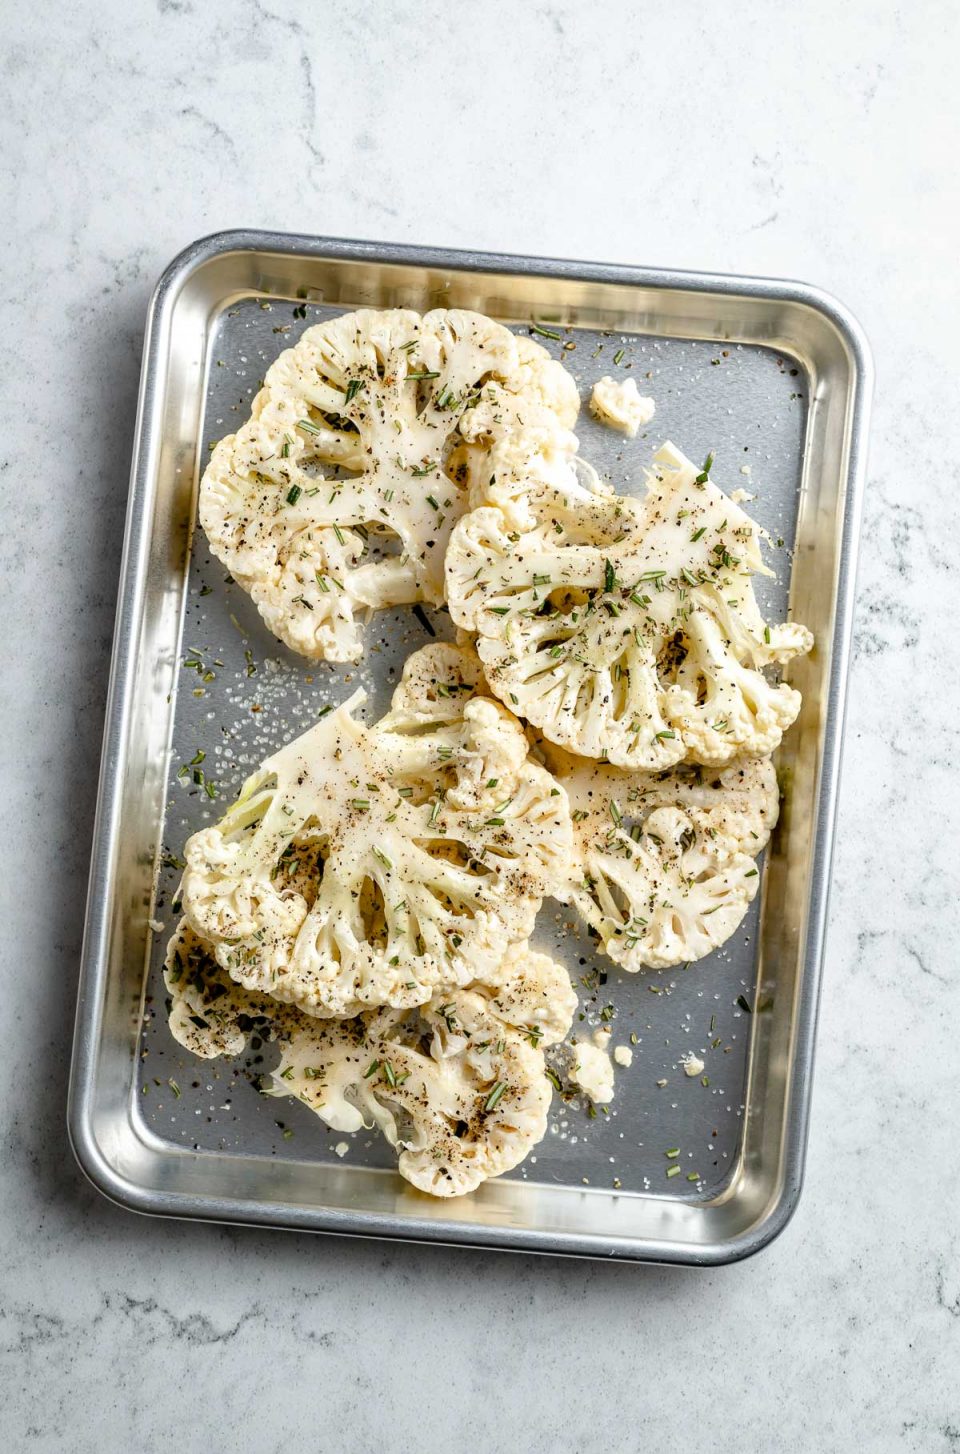 Multiple fresh & uncooked cauliflower steaks seasoned with oil, kosher salt, & ground black pepper lie on an aluminum baking sheet. The baking sheet sits on top of a white & gray marble surface.